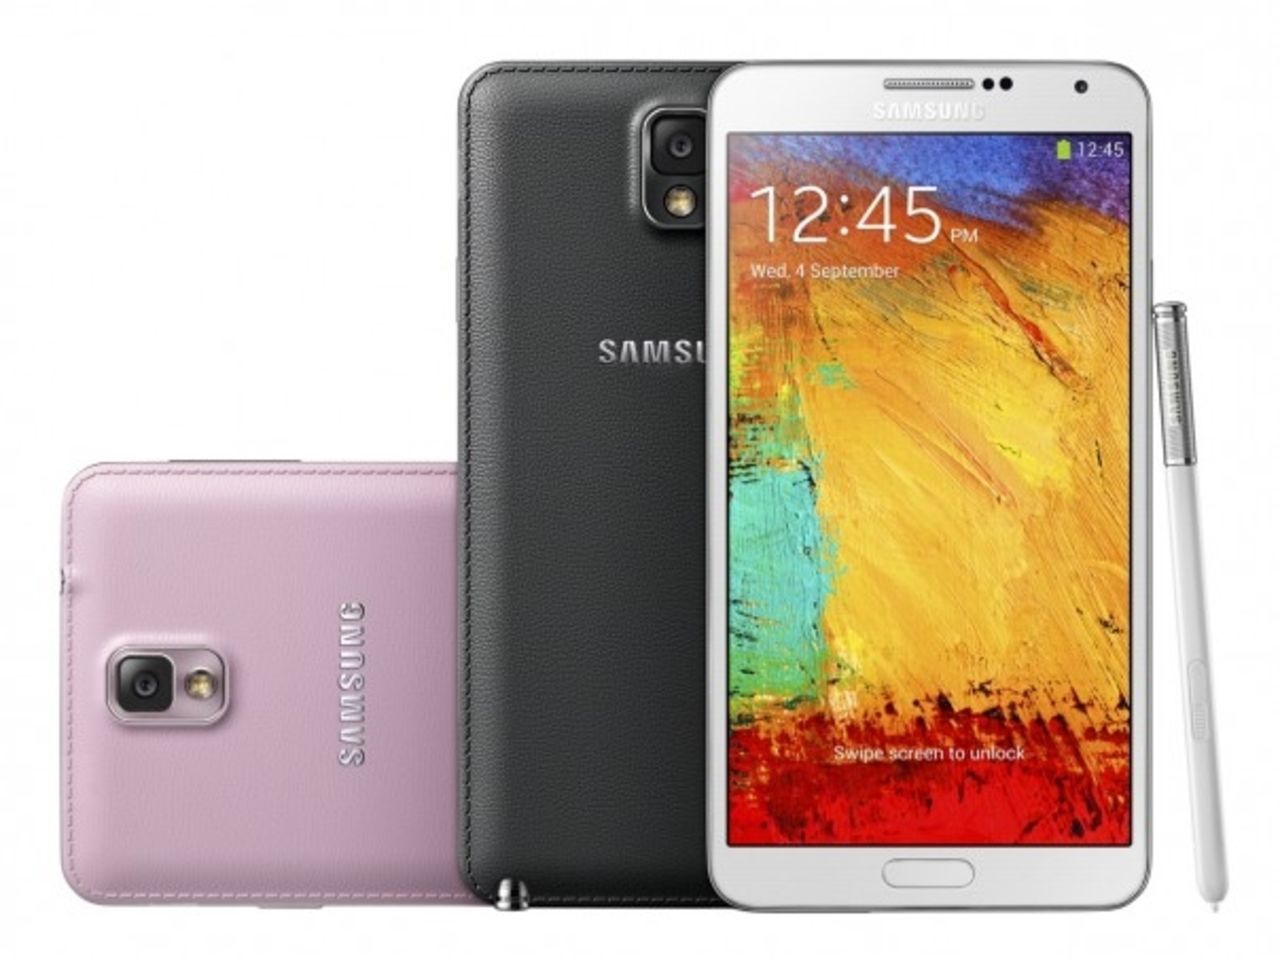 The Galaxy Note 3 is the third-generation of the Note "phablet" with a 1920 x 1080 5.7in screen, eight-core processor and a 13MP camera with 3x optical zoom.